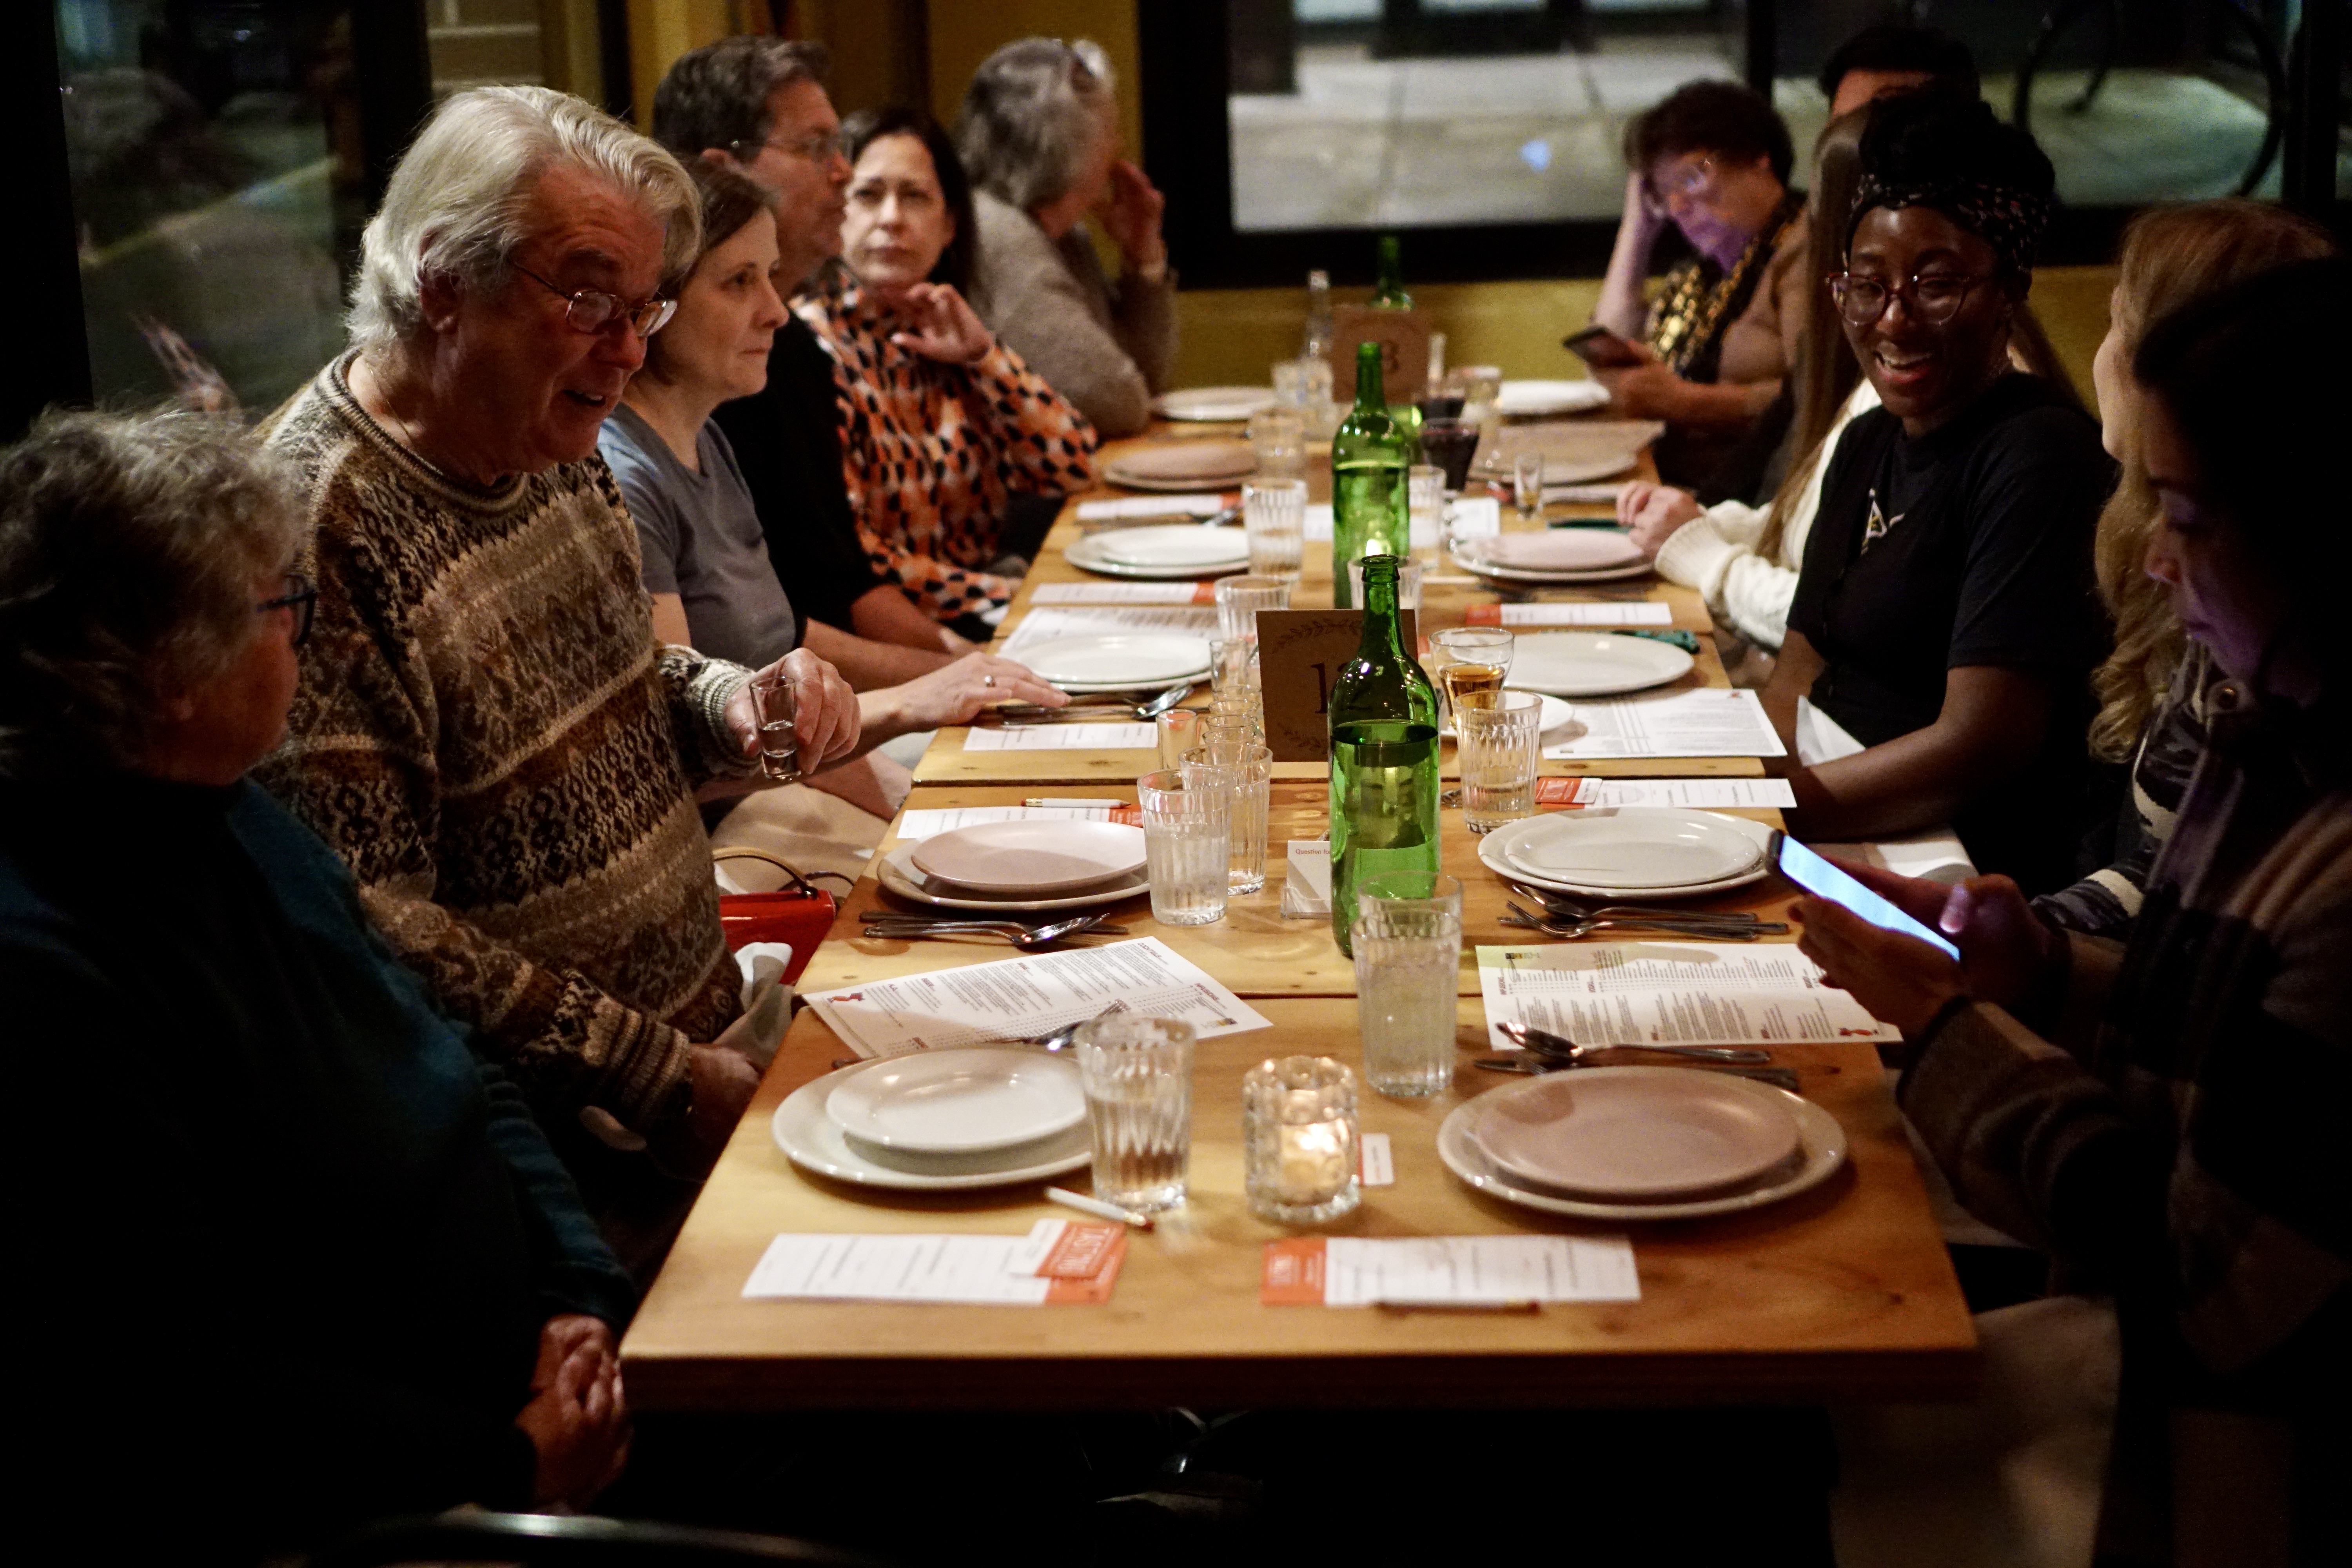 Diners sit at a long communal dinner table and interact over the table, which is set with plates and menus.